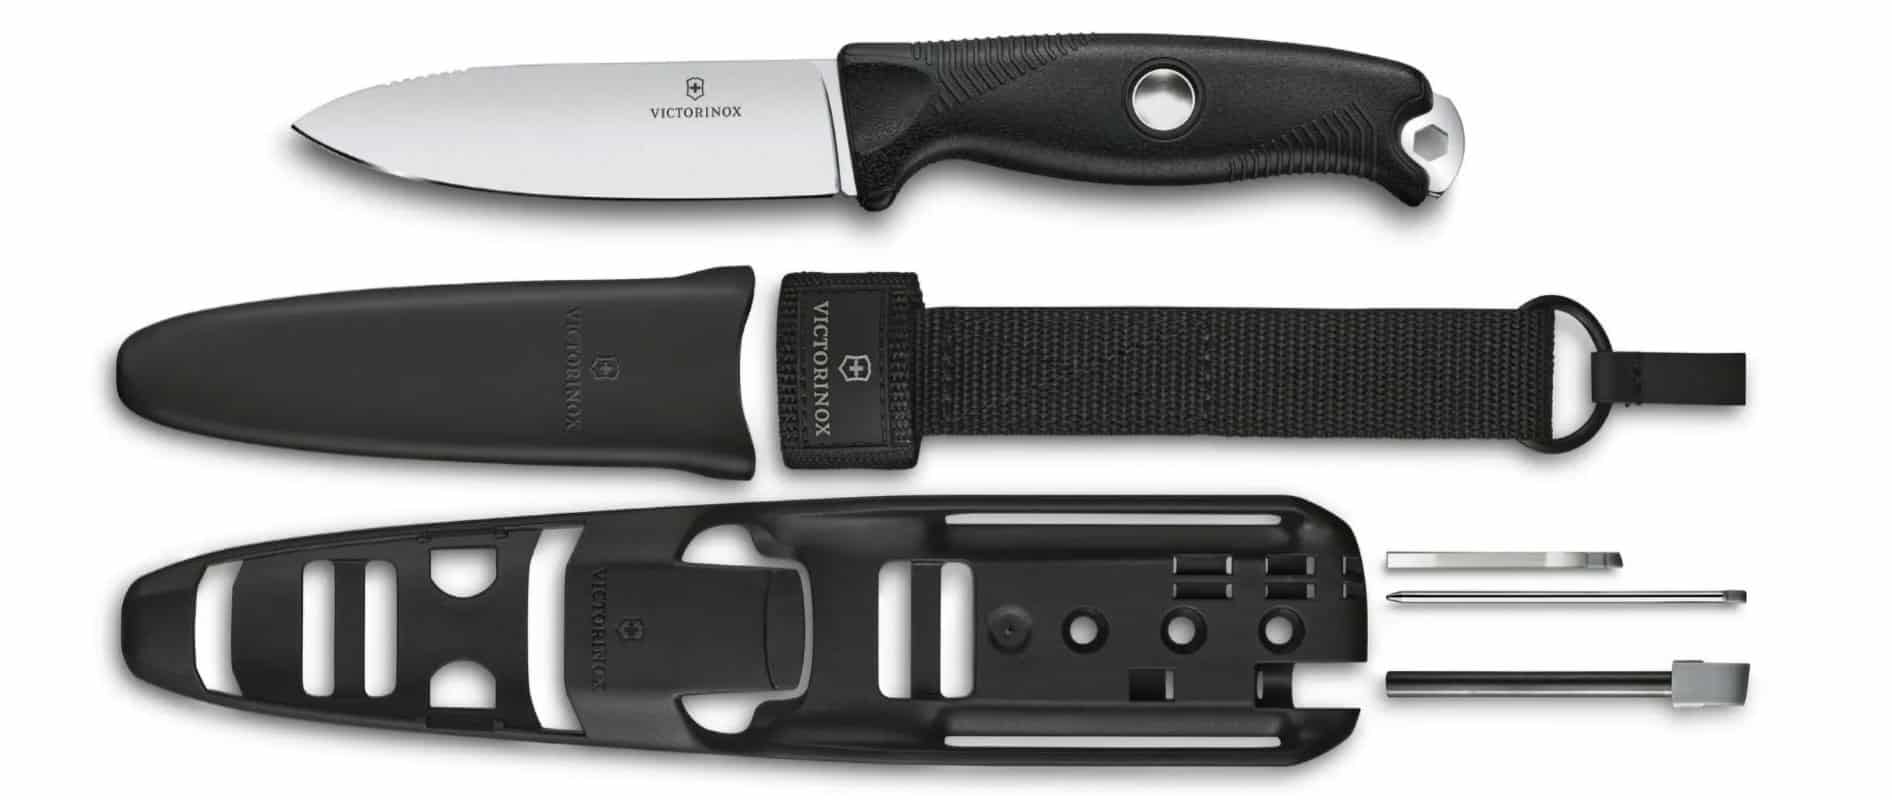 The Victorinox Venture Pro bushcraft knife is designed for the harshest wilderness environments. 